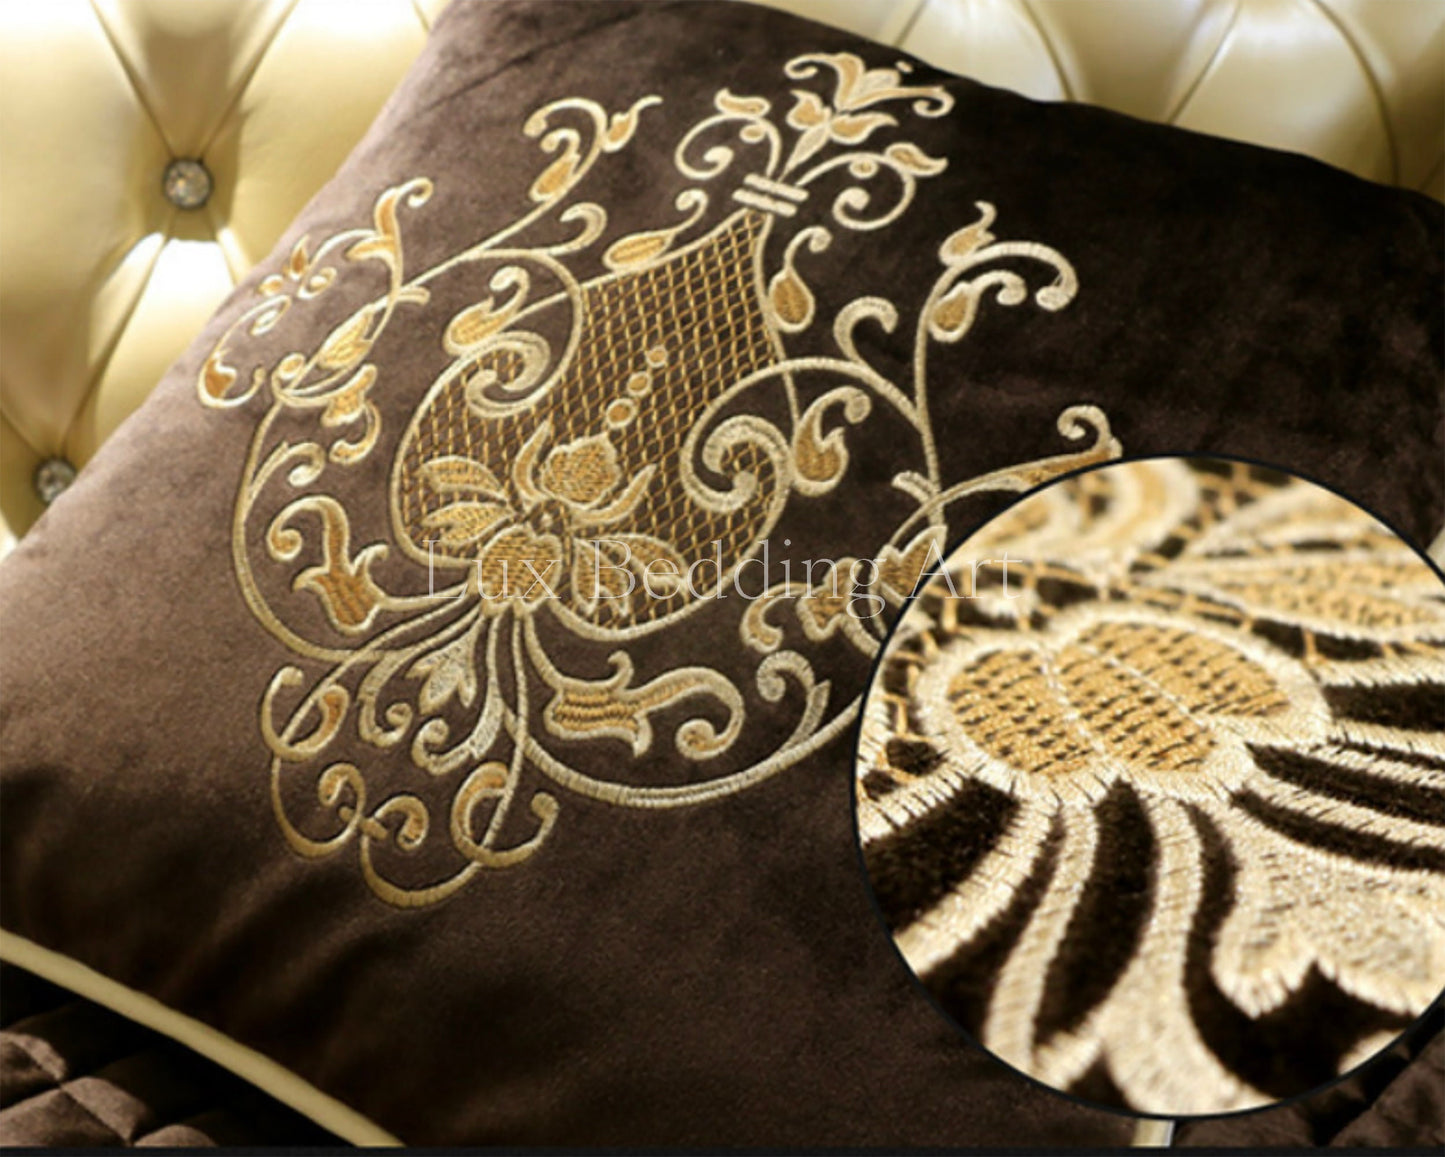 LUXURY Decorative Embroidery European design cushion cover pillow case • Velvet Pillow cover • hight quality • 2 size